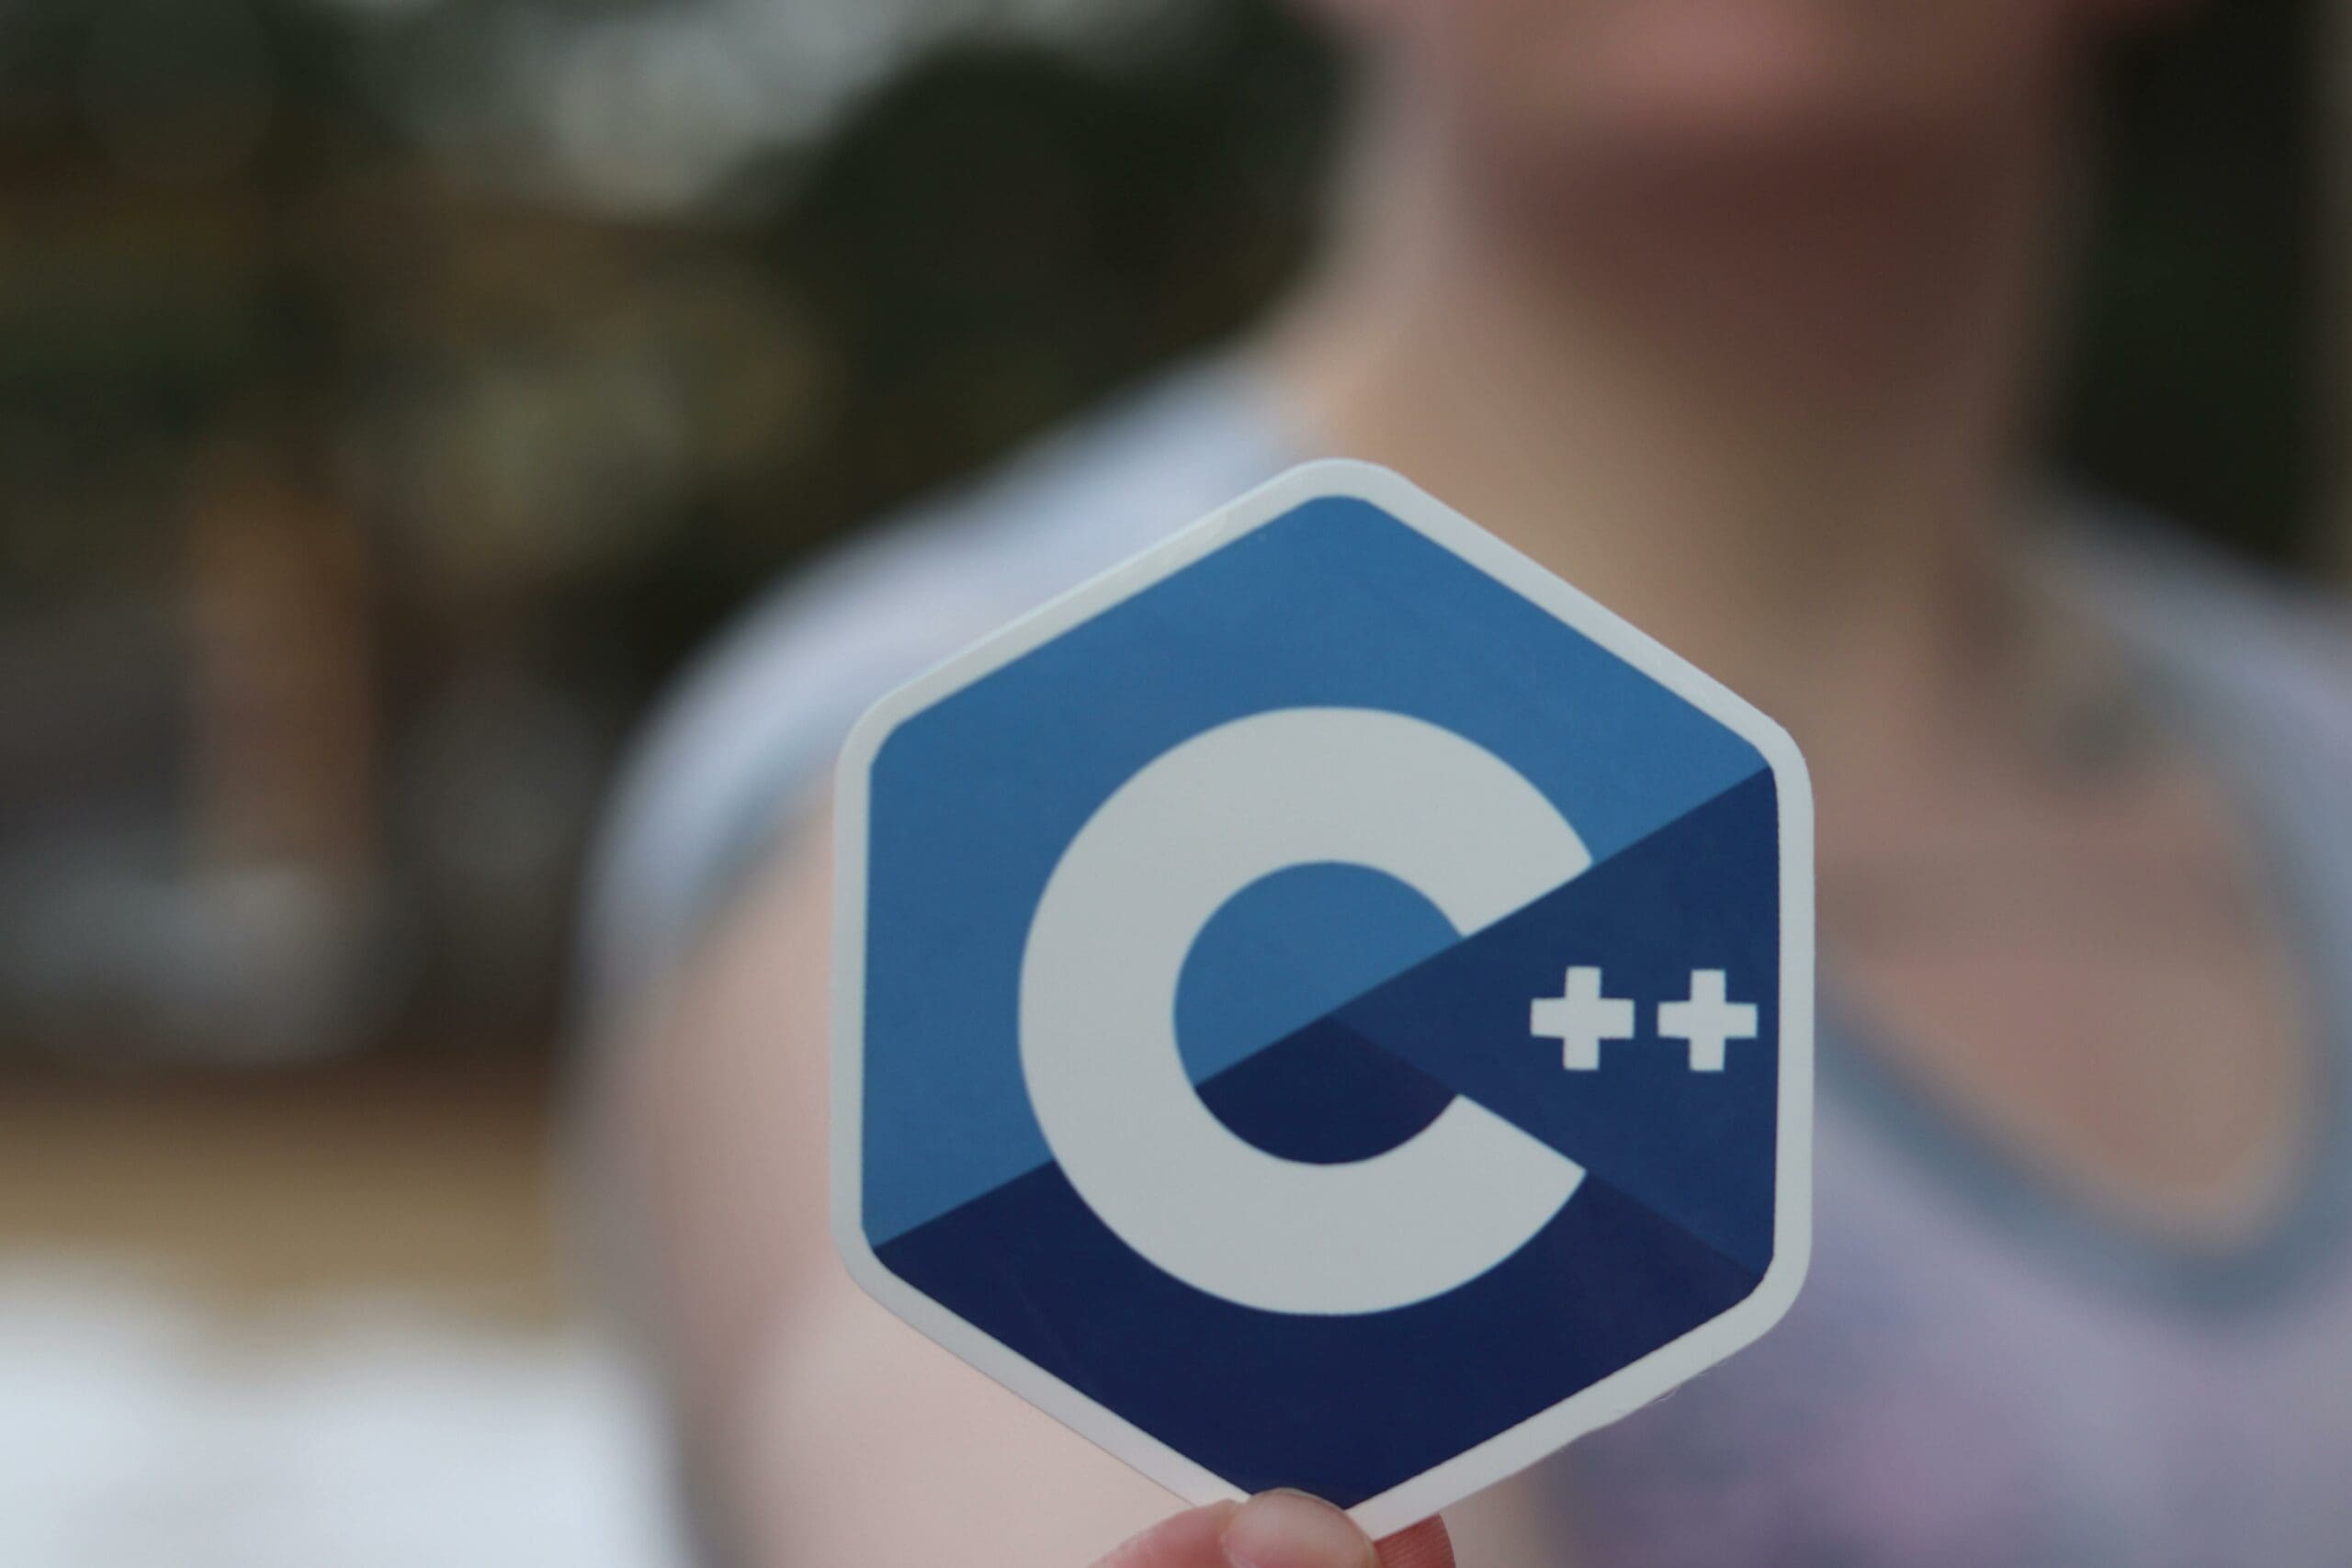 C++ Facts for Kids – 5 Solid Facts about C++